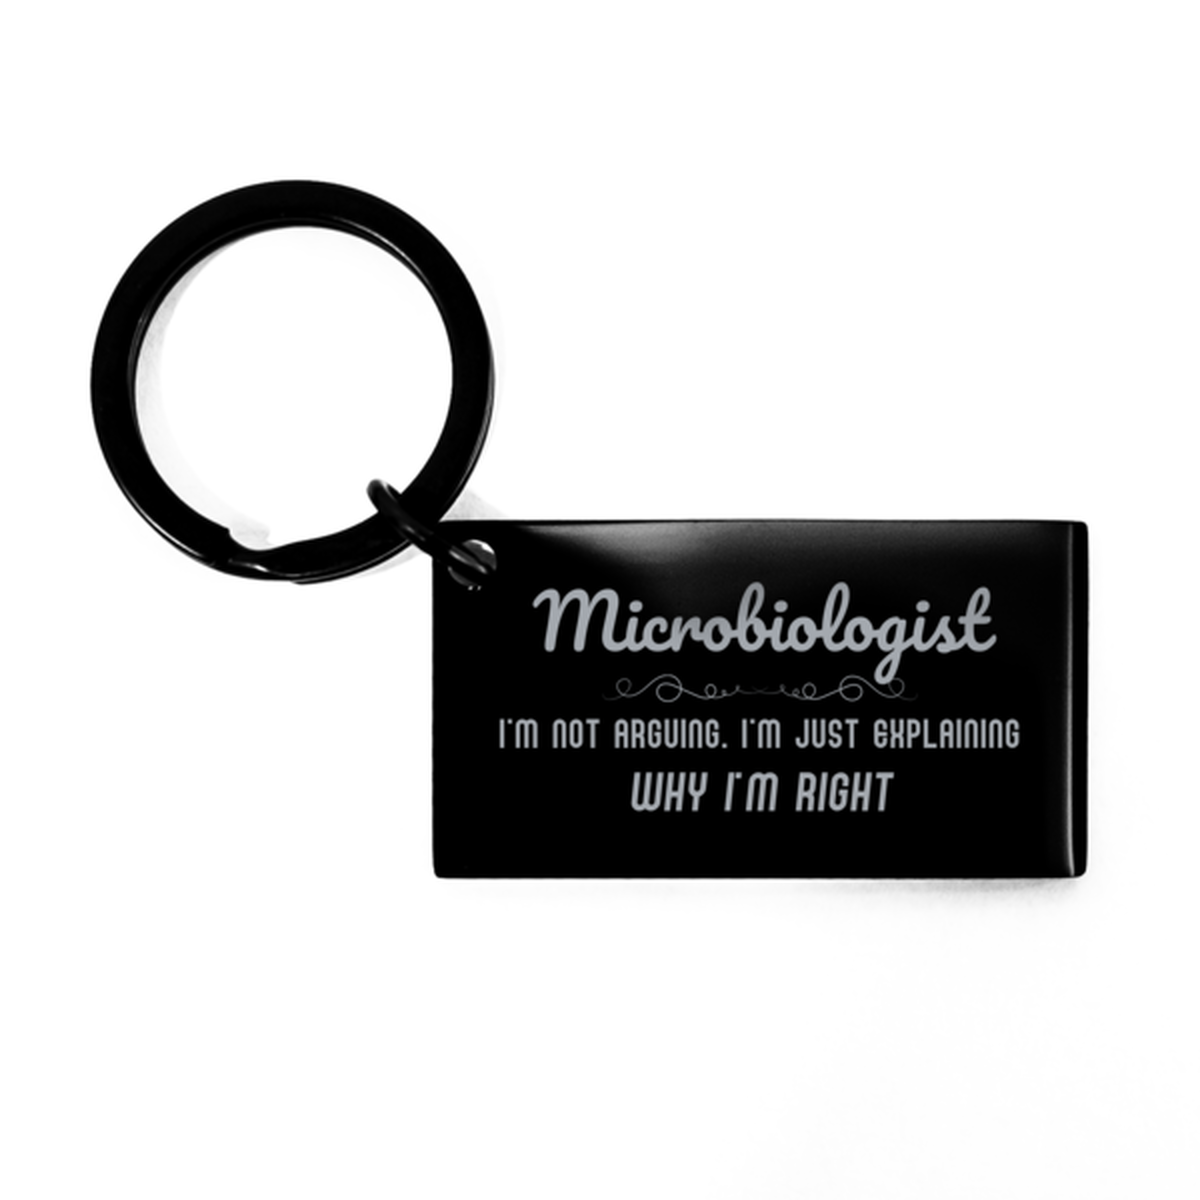 Microbiologist I'm not Arguing. I'm Just Explaining Why I'm RIGHT Keychain, Funny Saying Quote Microbiologist Gifts For Microbiologist Graduation Birthday Christmas Gifts for Men Women Coworker